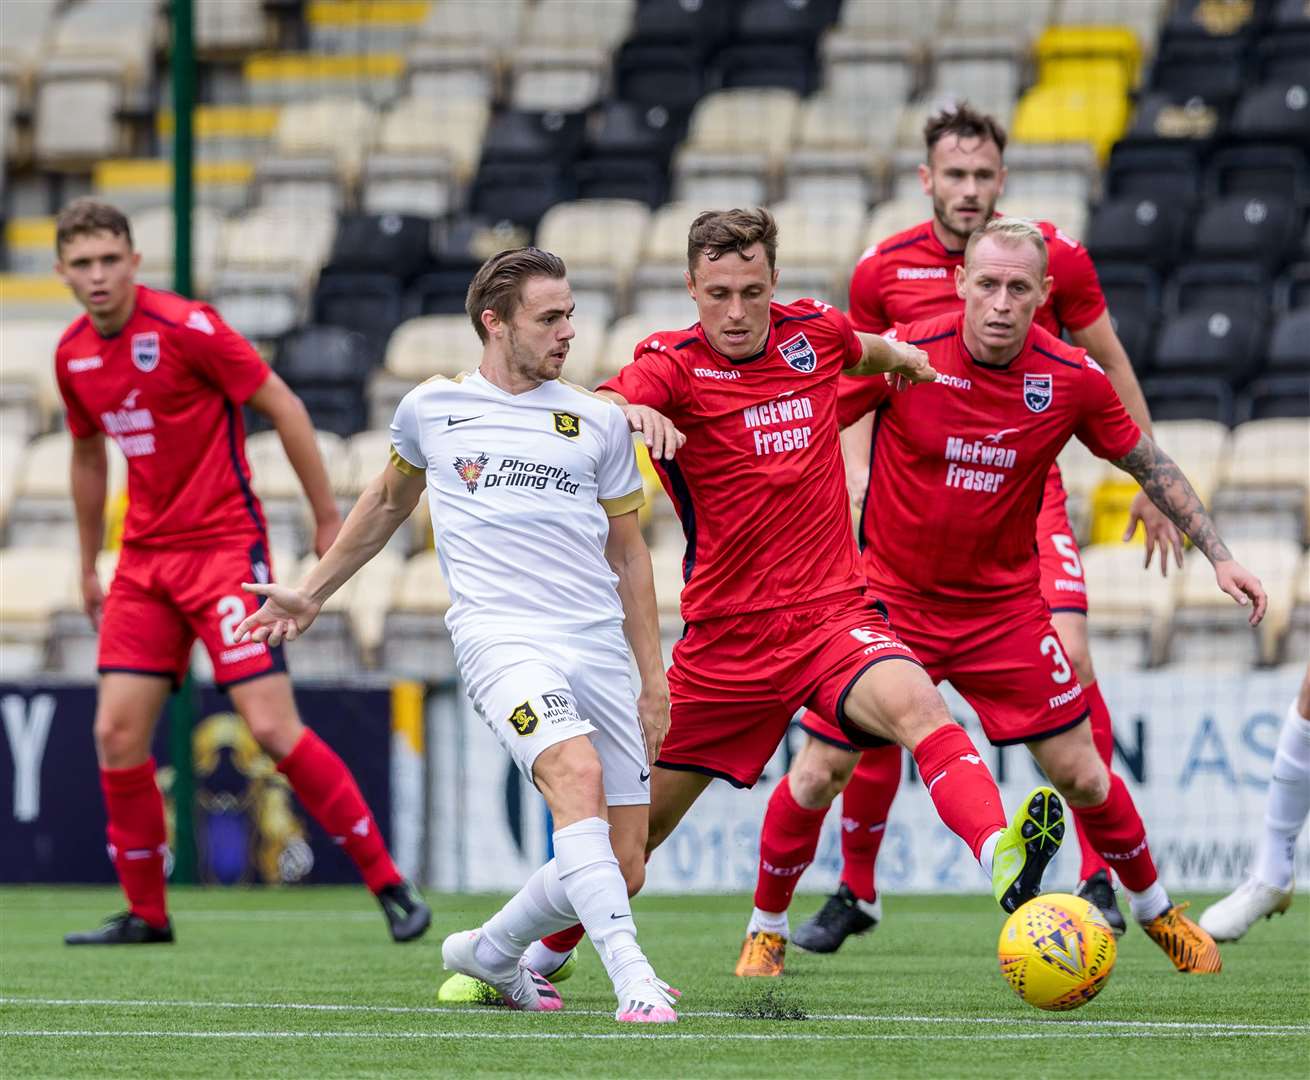 Ross County picked up draws against Aberdeen and Livingston in pre-season, also losing out to Celtic.